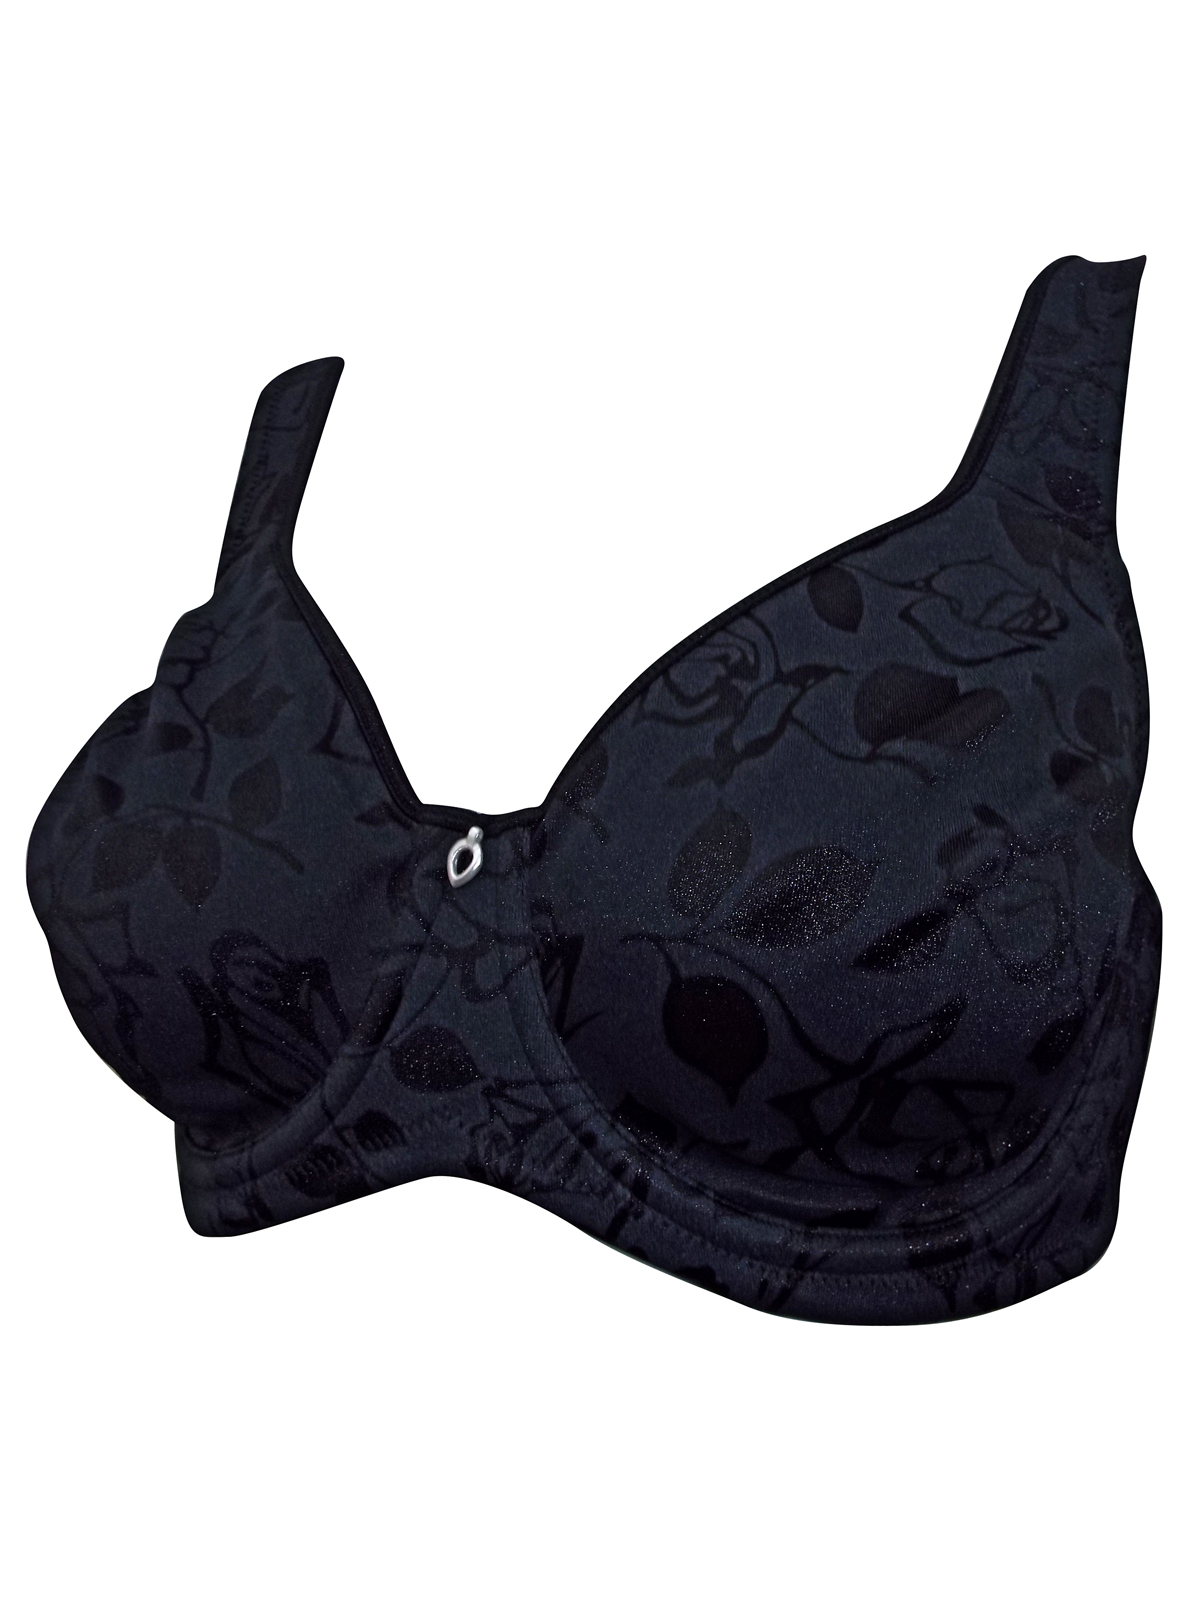 Thea 42 Plus Black Jacquard Floral Non Padded Full Cup Bra Size 80 To 105 Uk 36 To 46